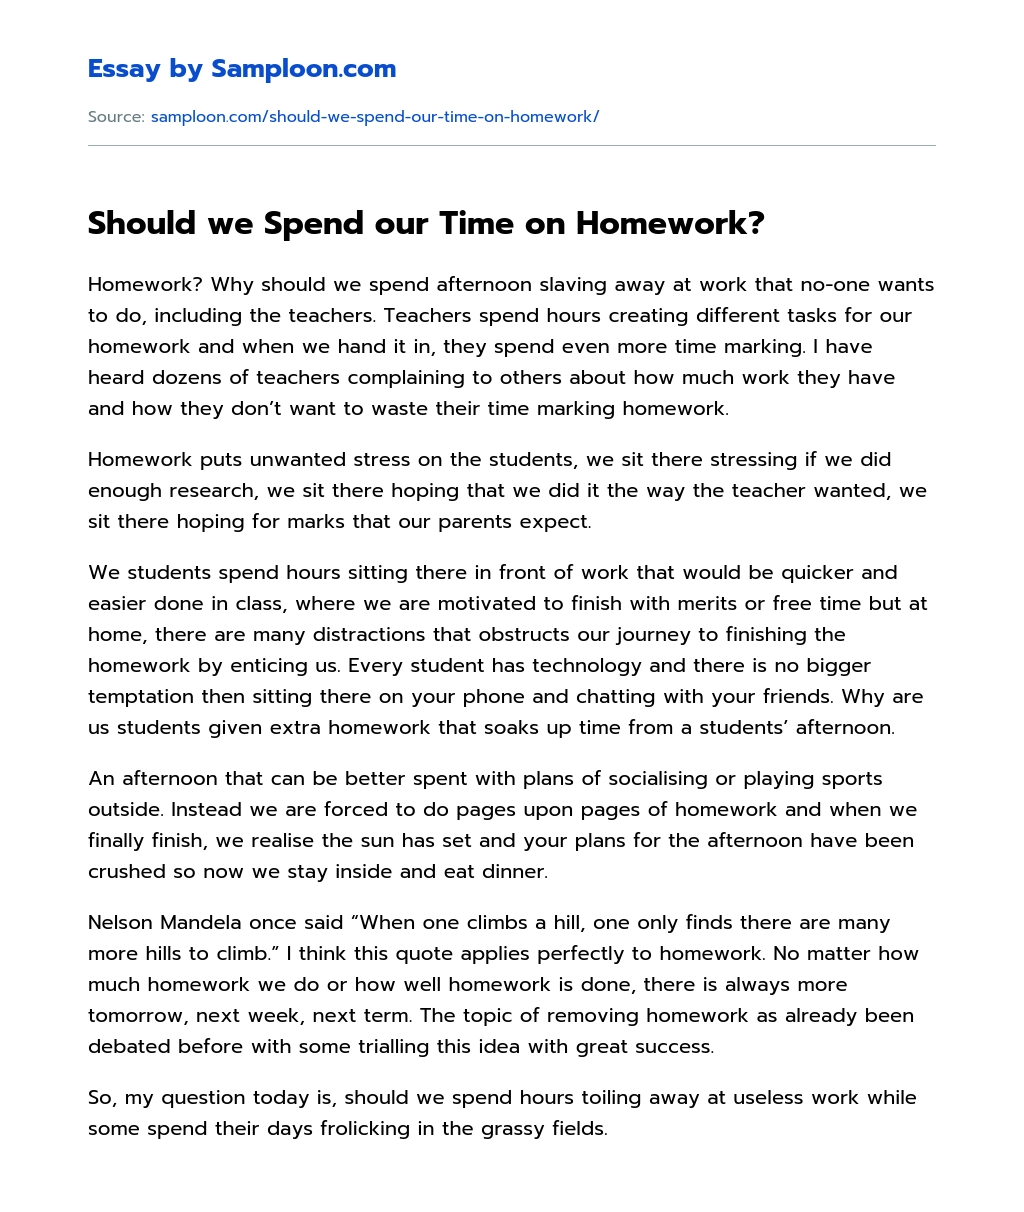 Should we Spend our Time on Homework? essay